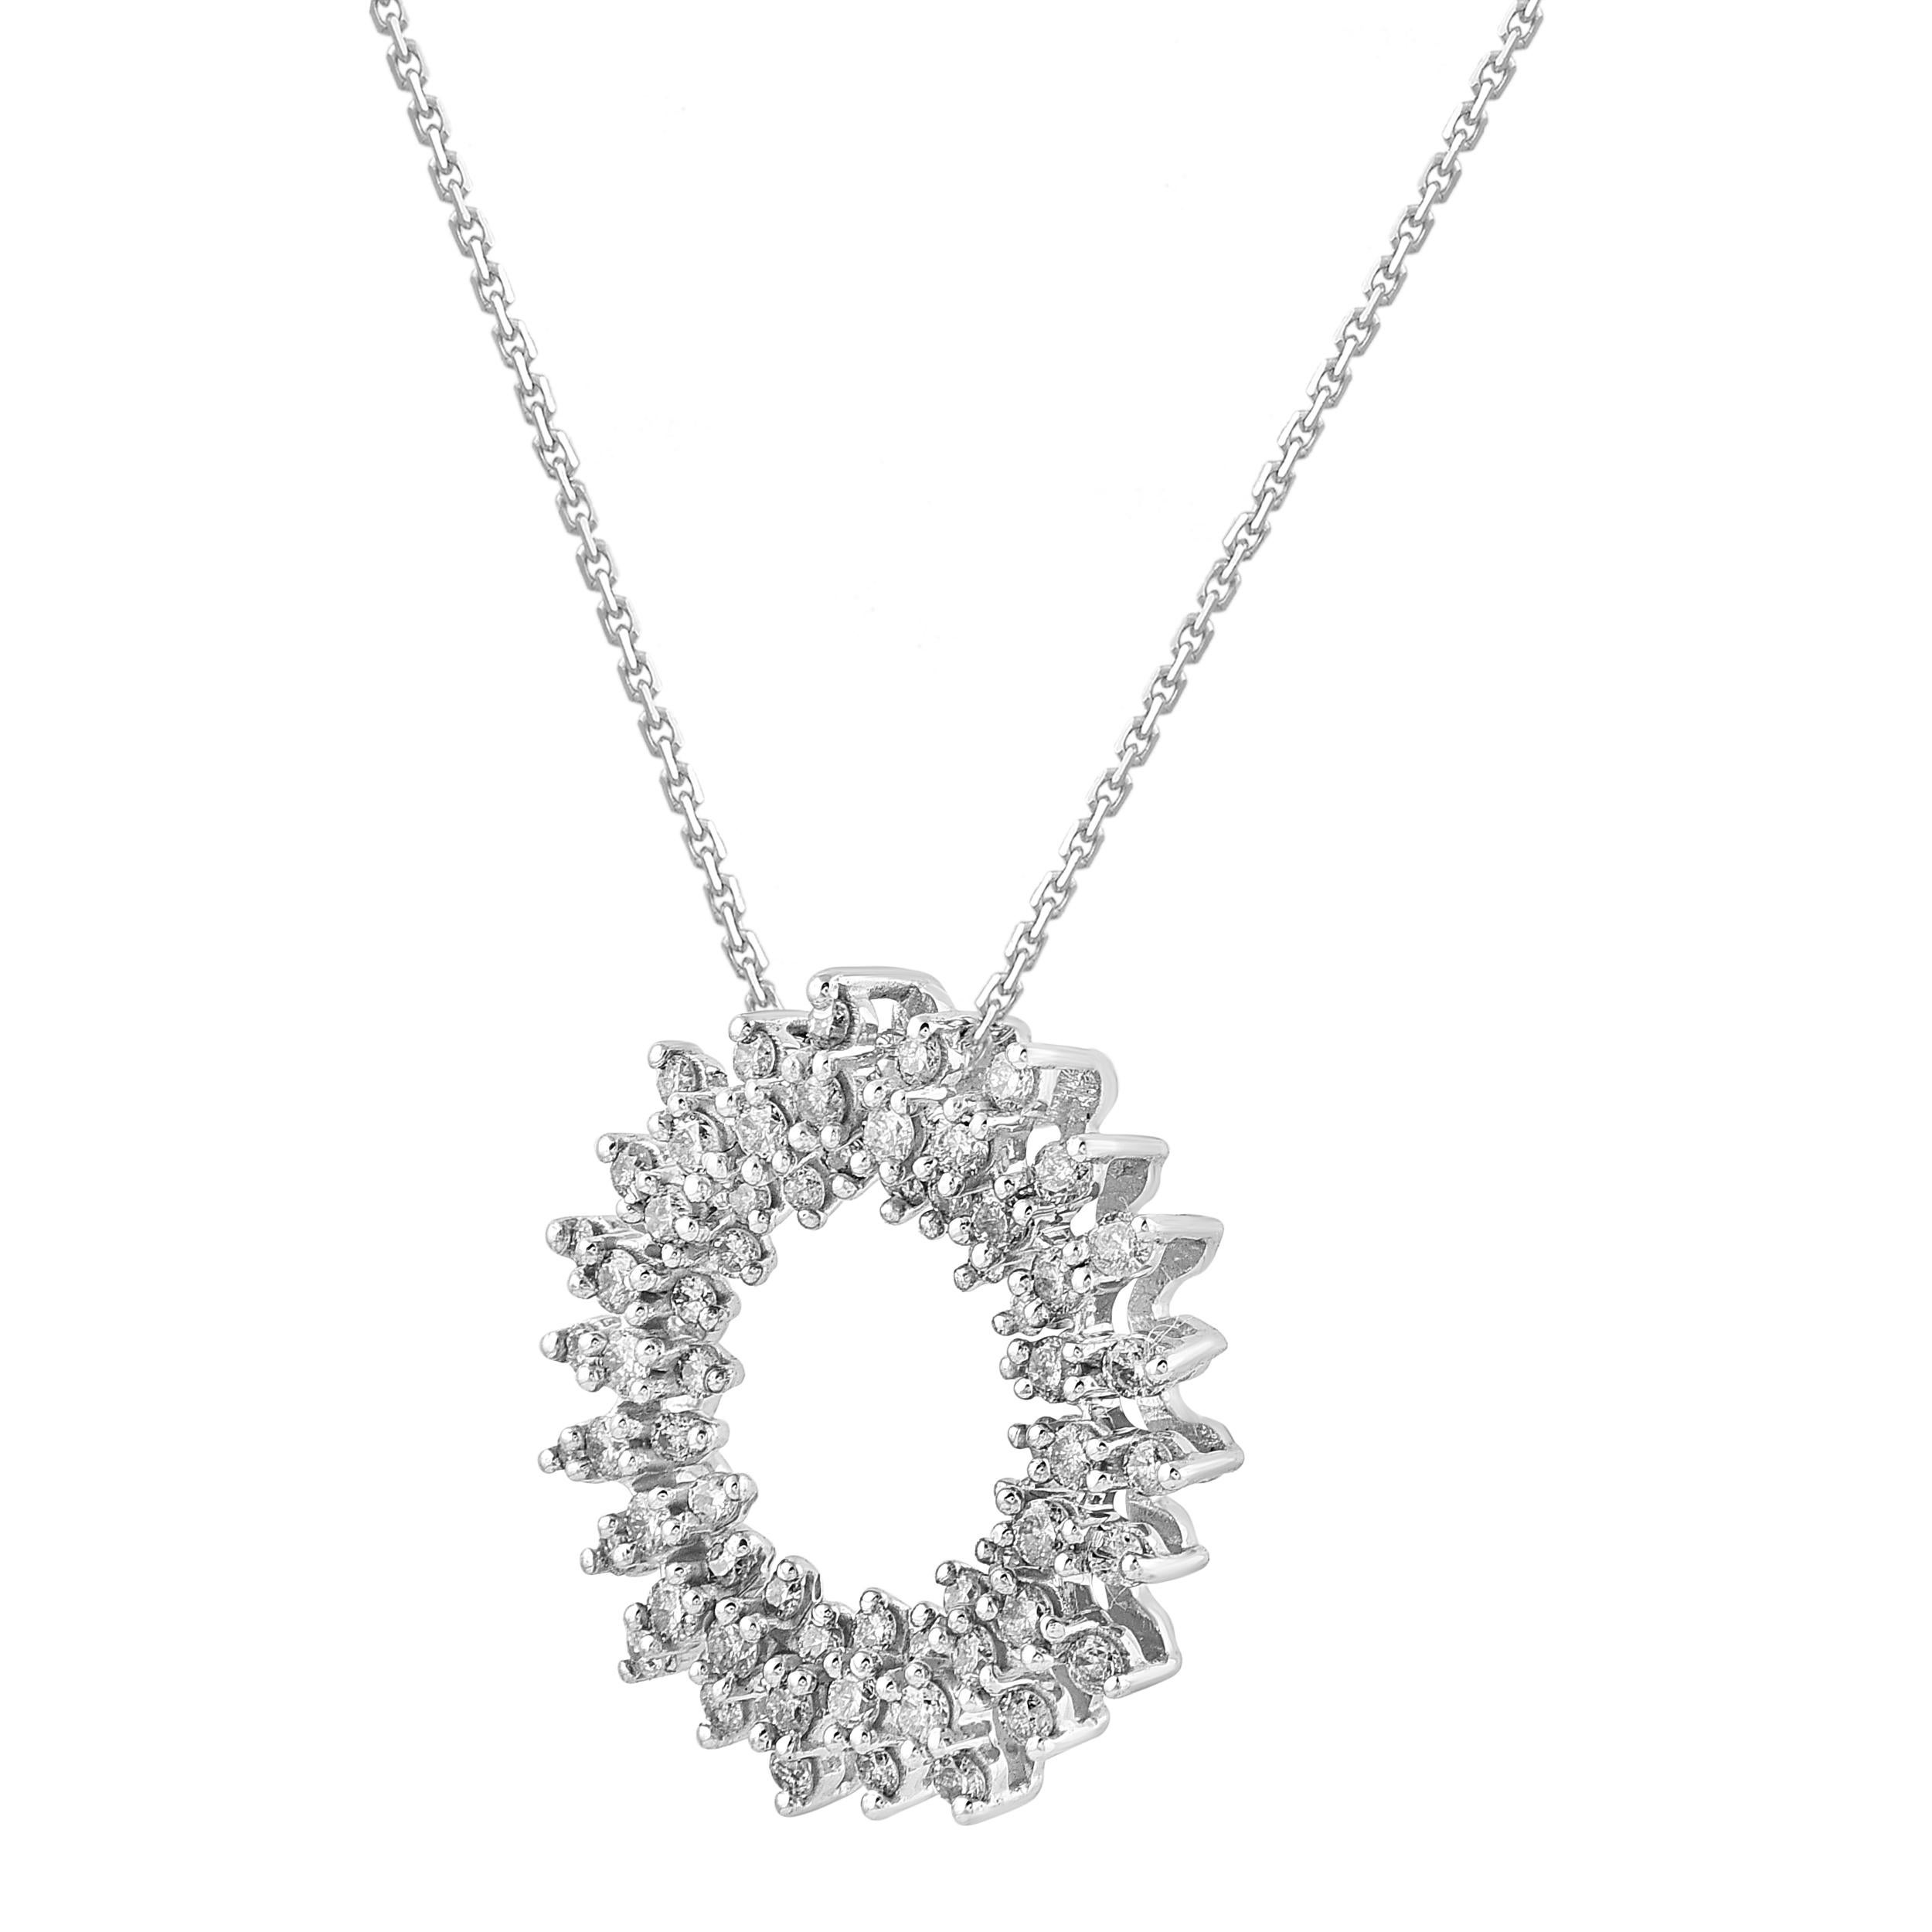 Stunning and Classic, this open circle diamond pendant proclaims her sophistication. The pendant is crafted from 14-karat white gold and studded with 66 round brilliant cut & single cut white diamonds in prong setting. H-I color I-2 clarity and a